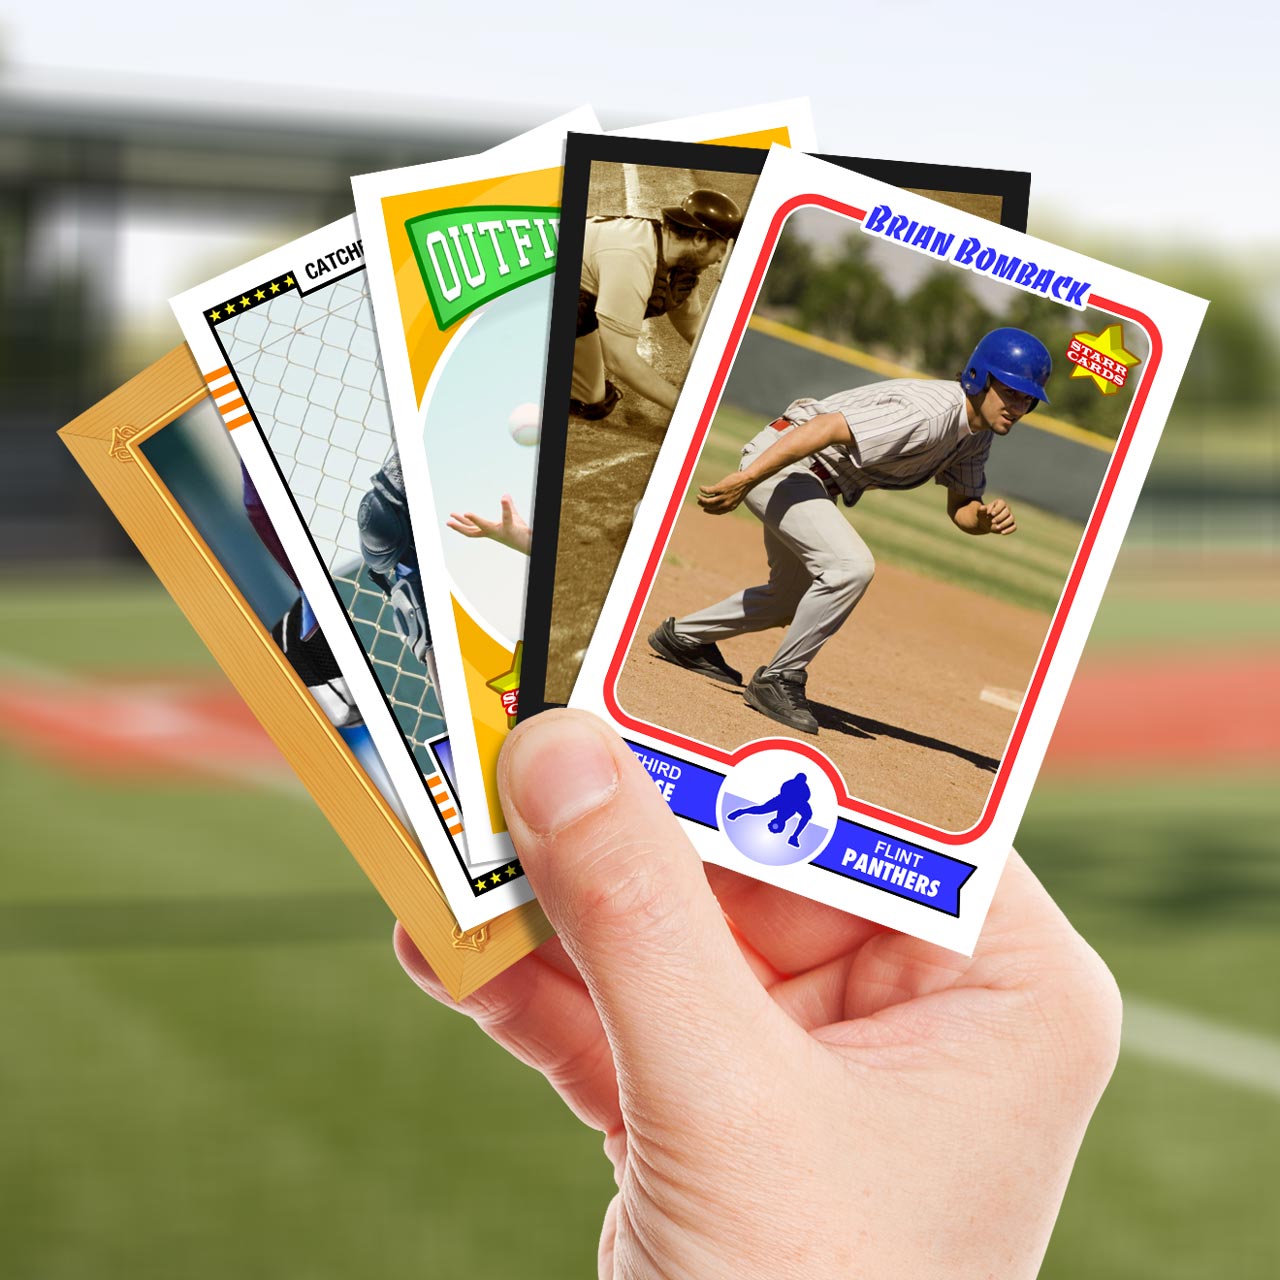 How To Print Your Own Baseball Cards